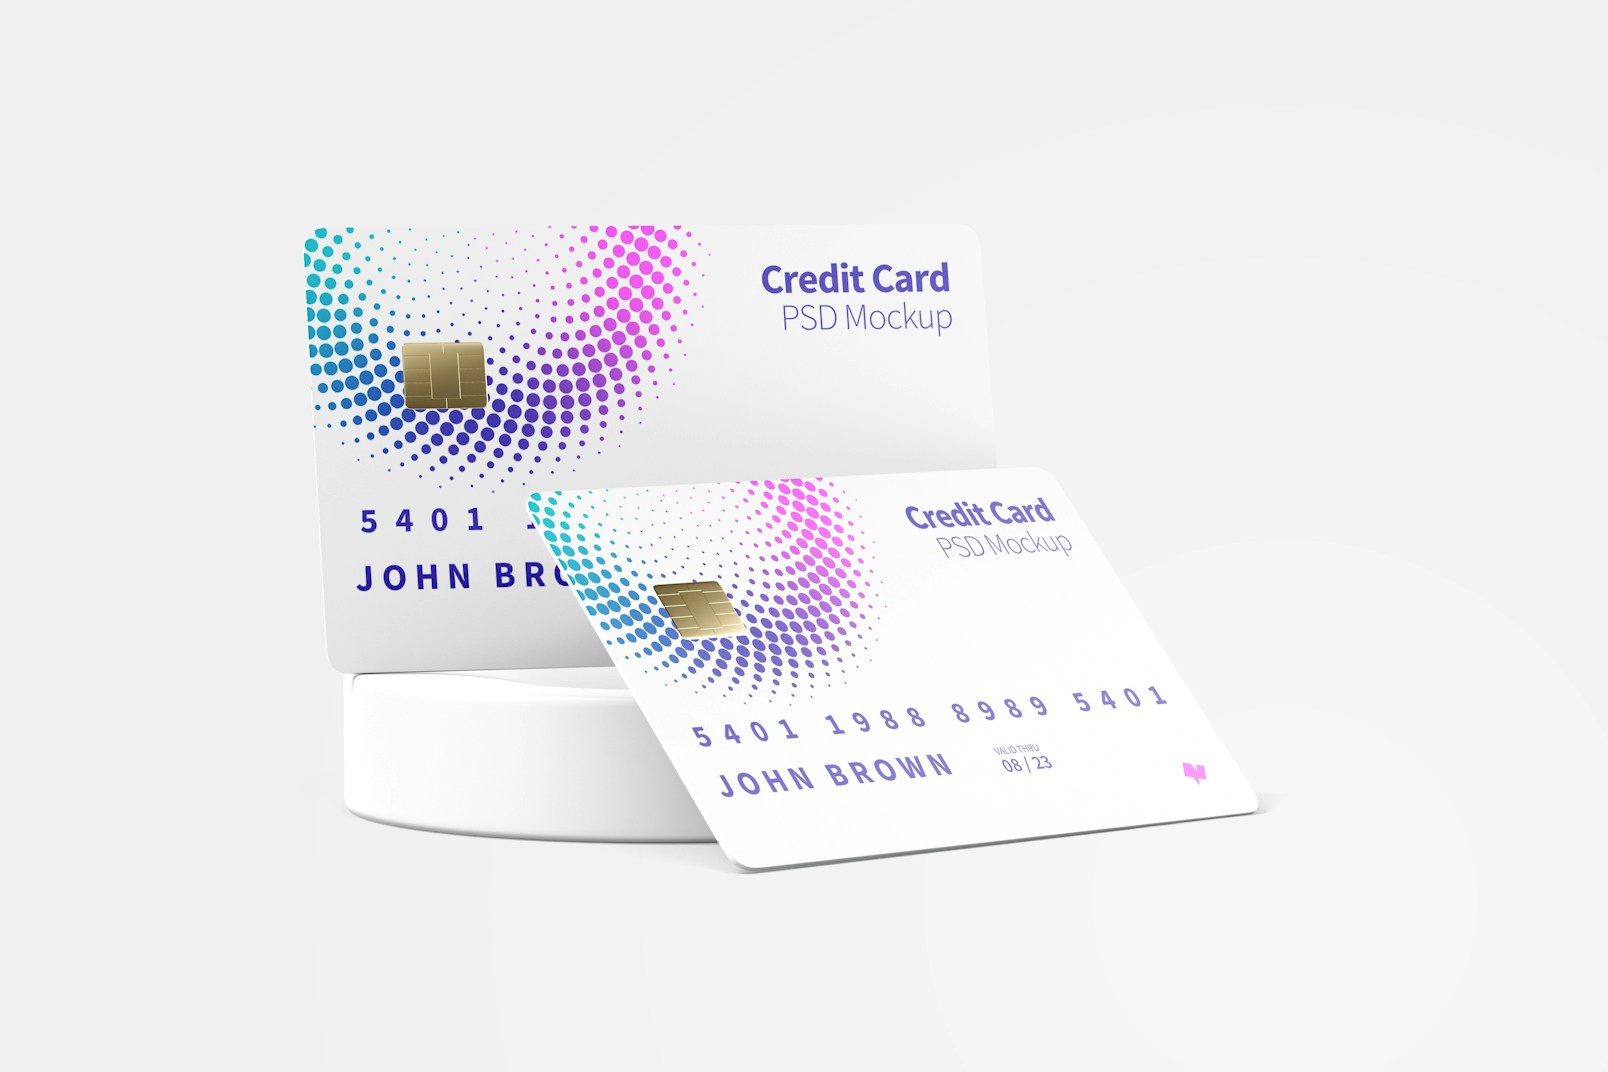 Credit Cards with Round Stone Mockup